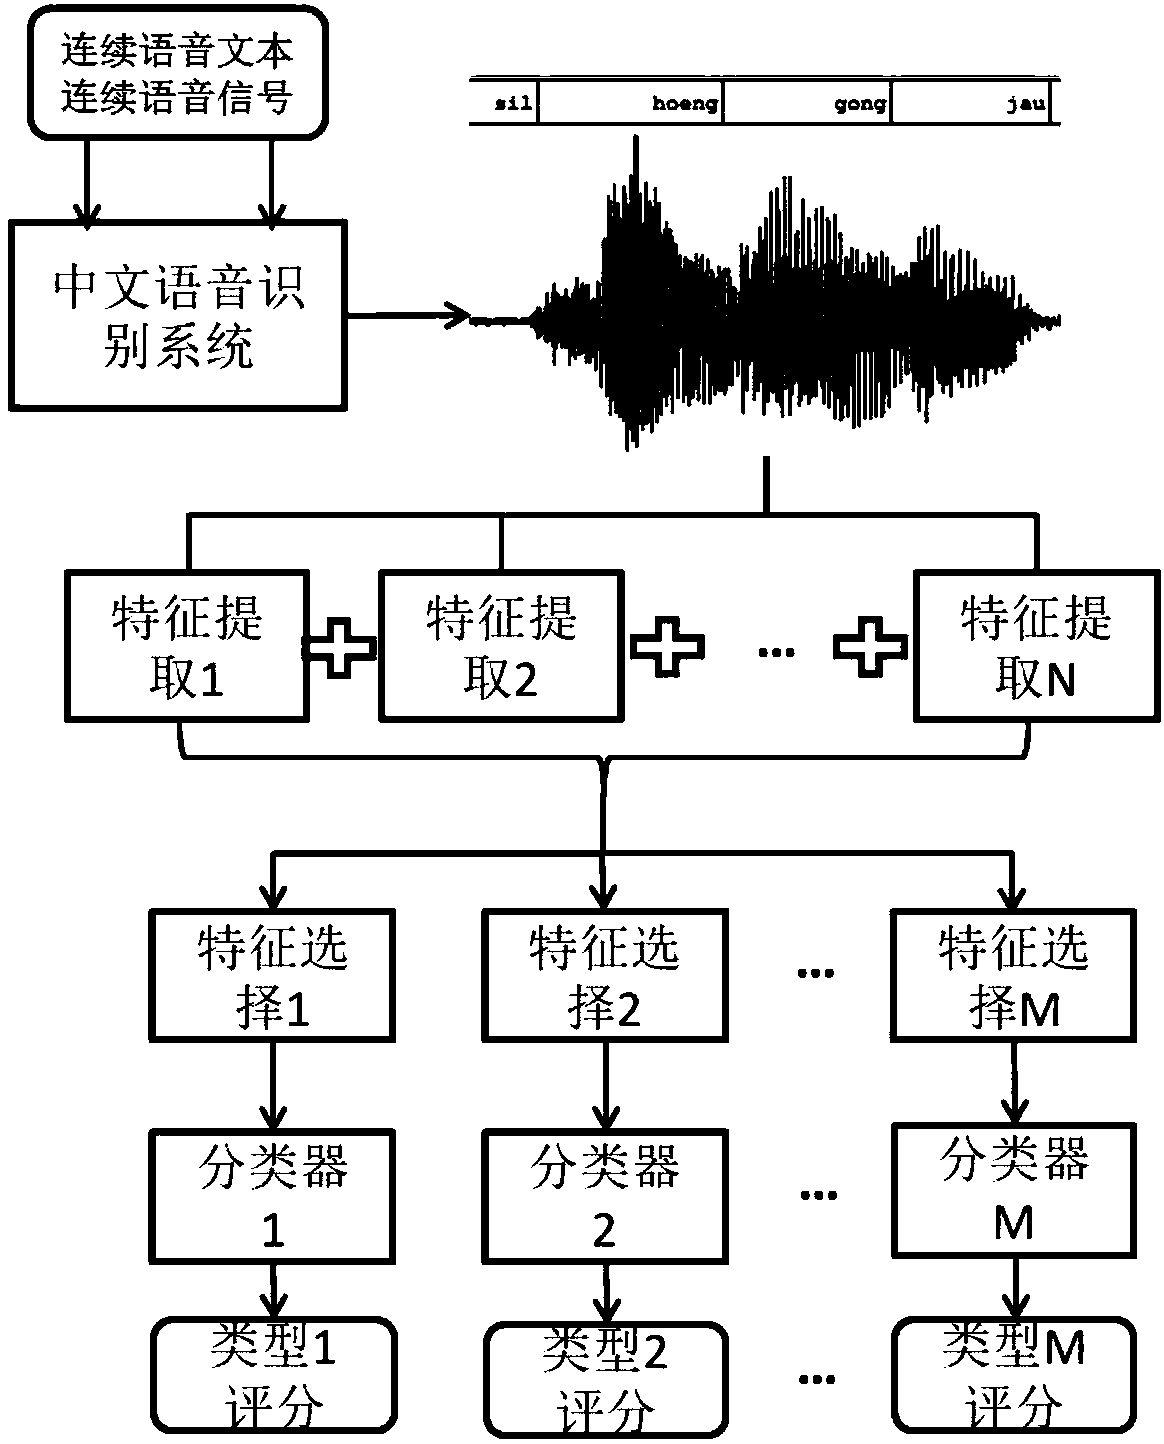 Ill-conditioned voice evaluation method based on Chinese voice